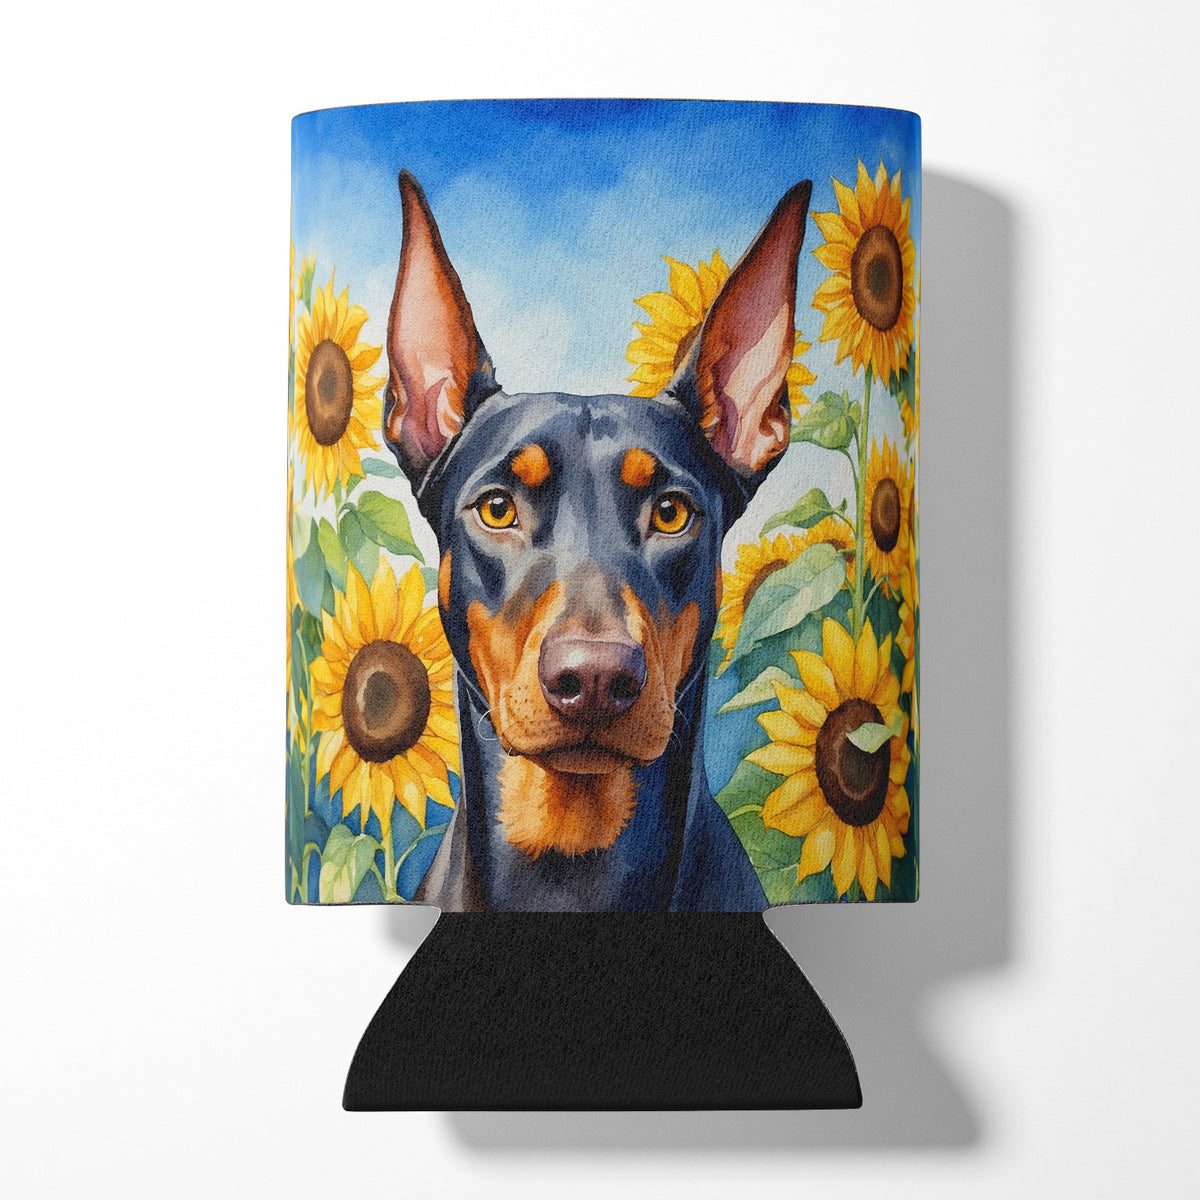 Buy this Doberman Pinscher in Sunflowers Can or Bottle Hugger